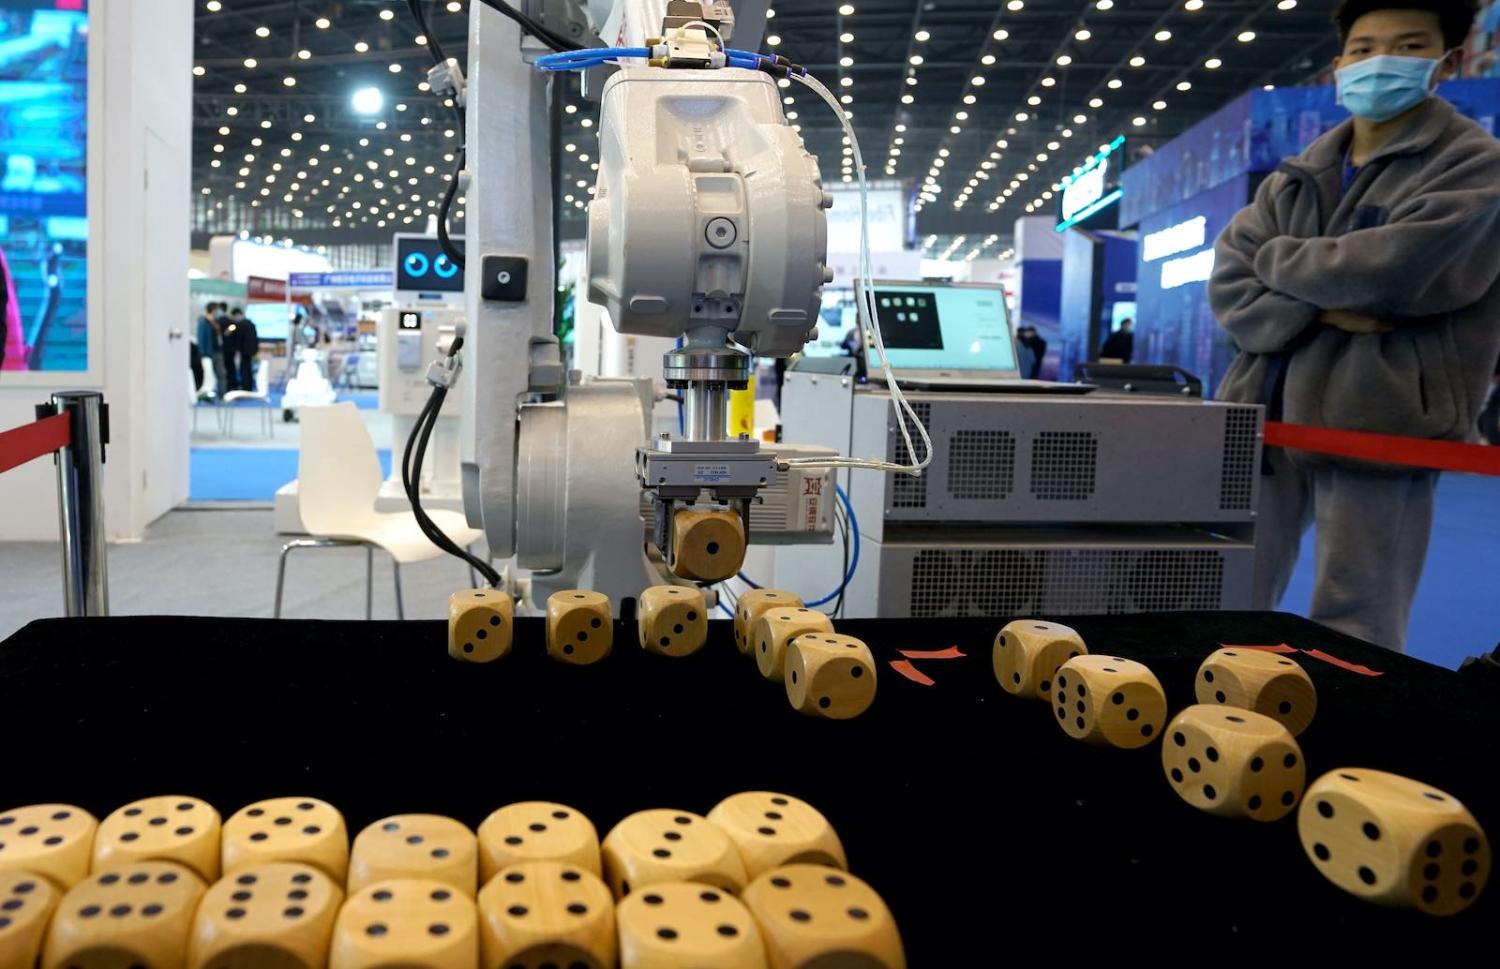 A robotic arm arranges dice during the 2021 World Digital Industry Expo in Zhengzhou, Henan province, China, 24 March 2021 (Ma Jian/VCG via Getty Images)